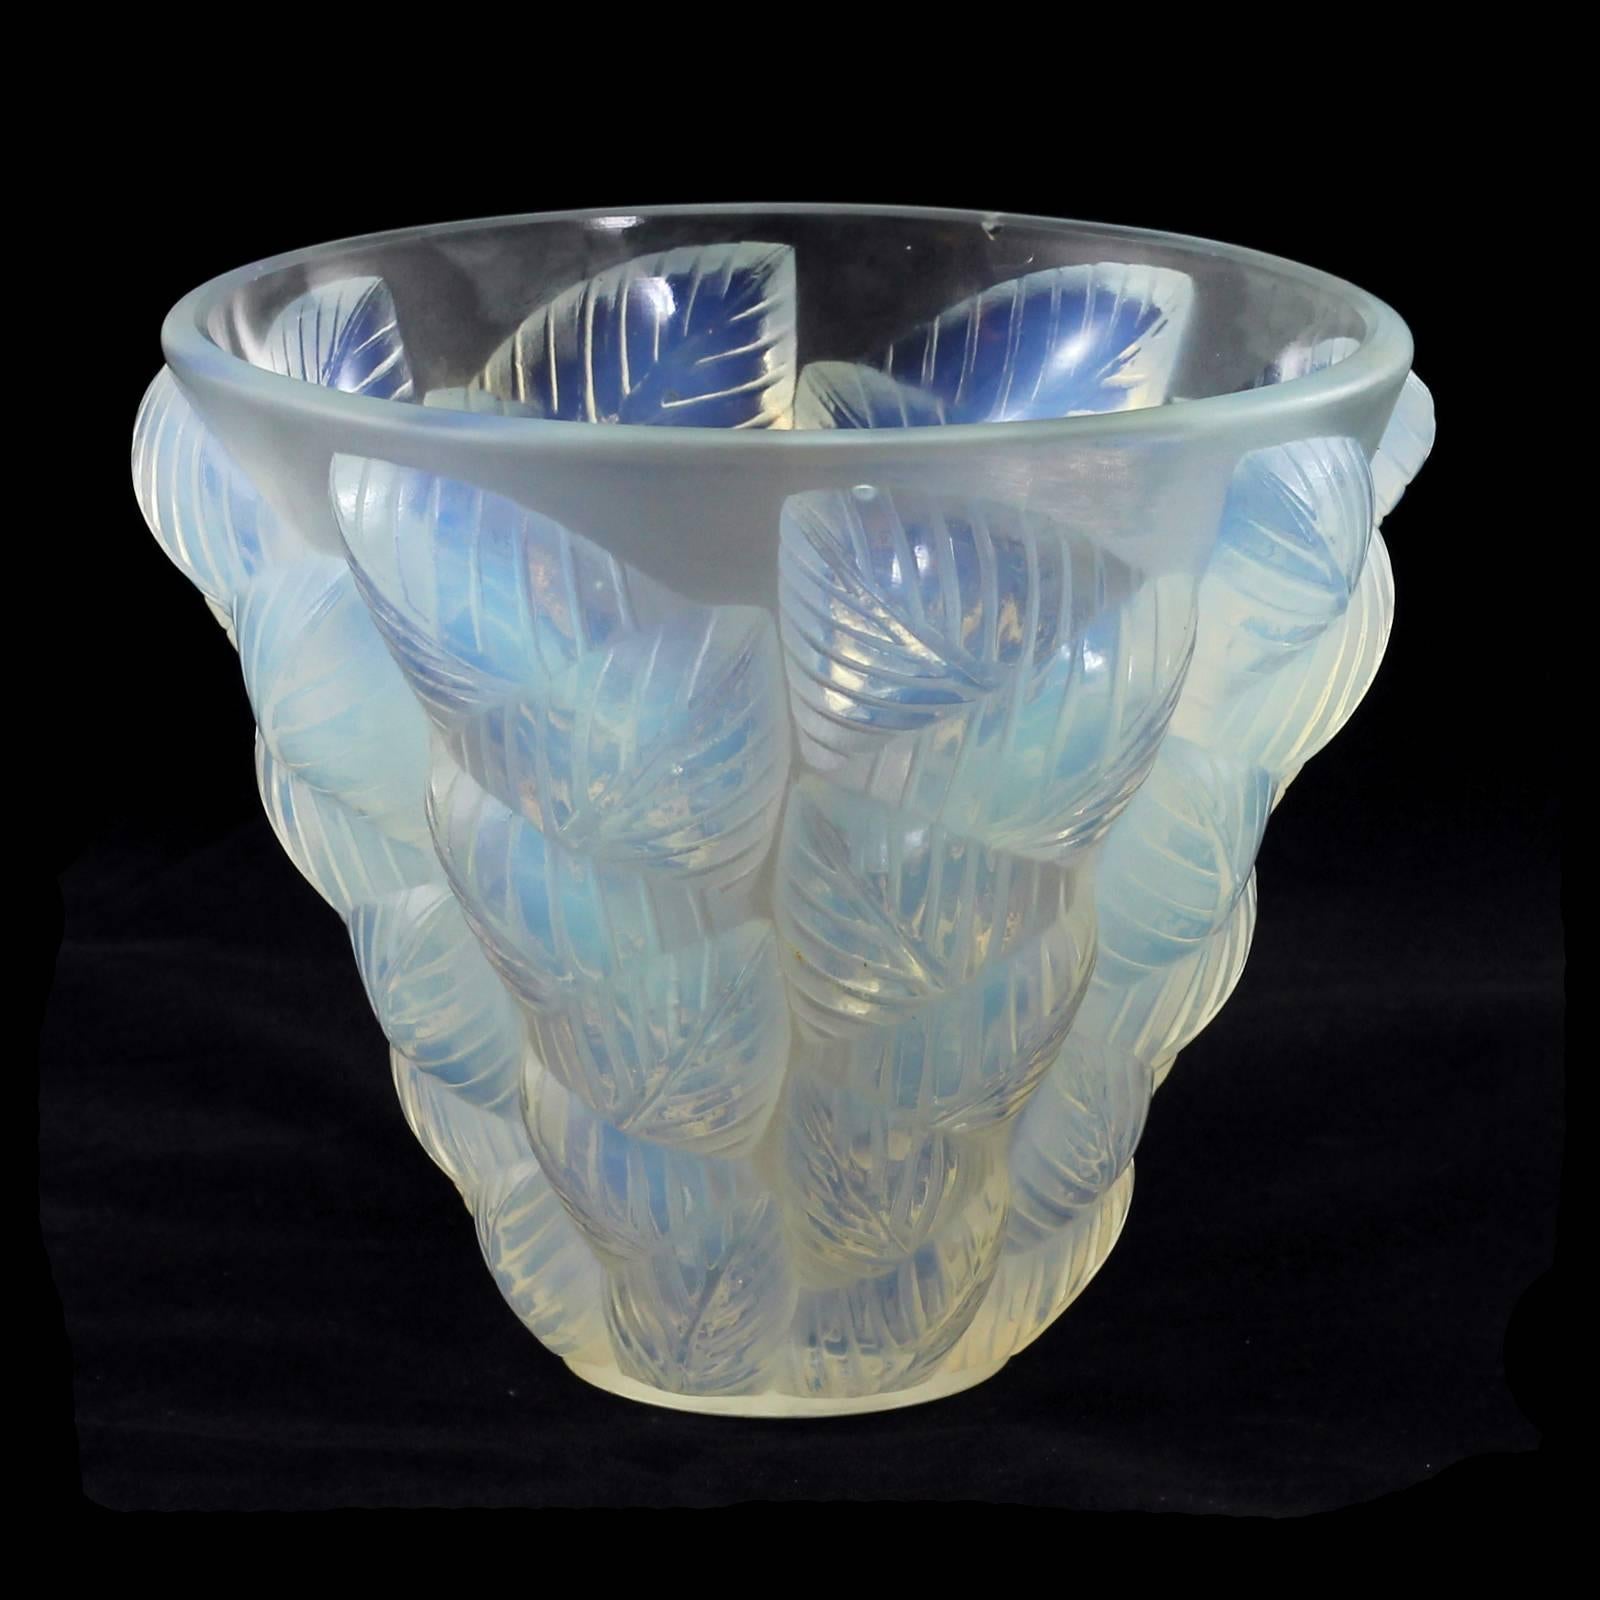 An early 20th century Art Deco glass vase in the 'Moissac' pattern by René Lalique. The opalescent glass displays varying hues of blue and green throughout the repeating leaf motif. The piece is signed "R. Lalique. France No 992."